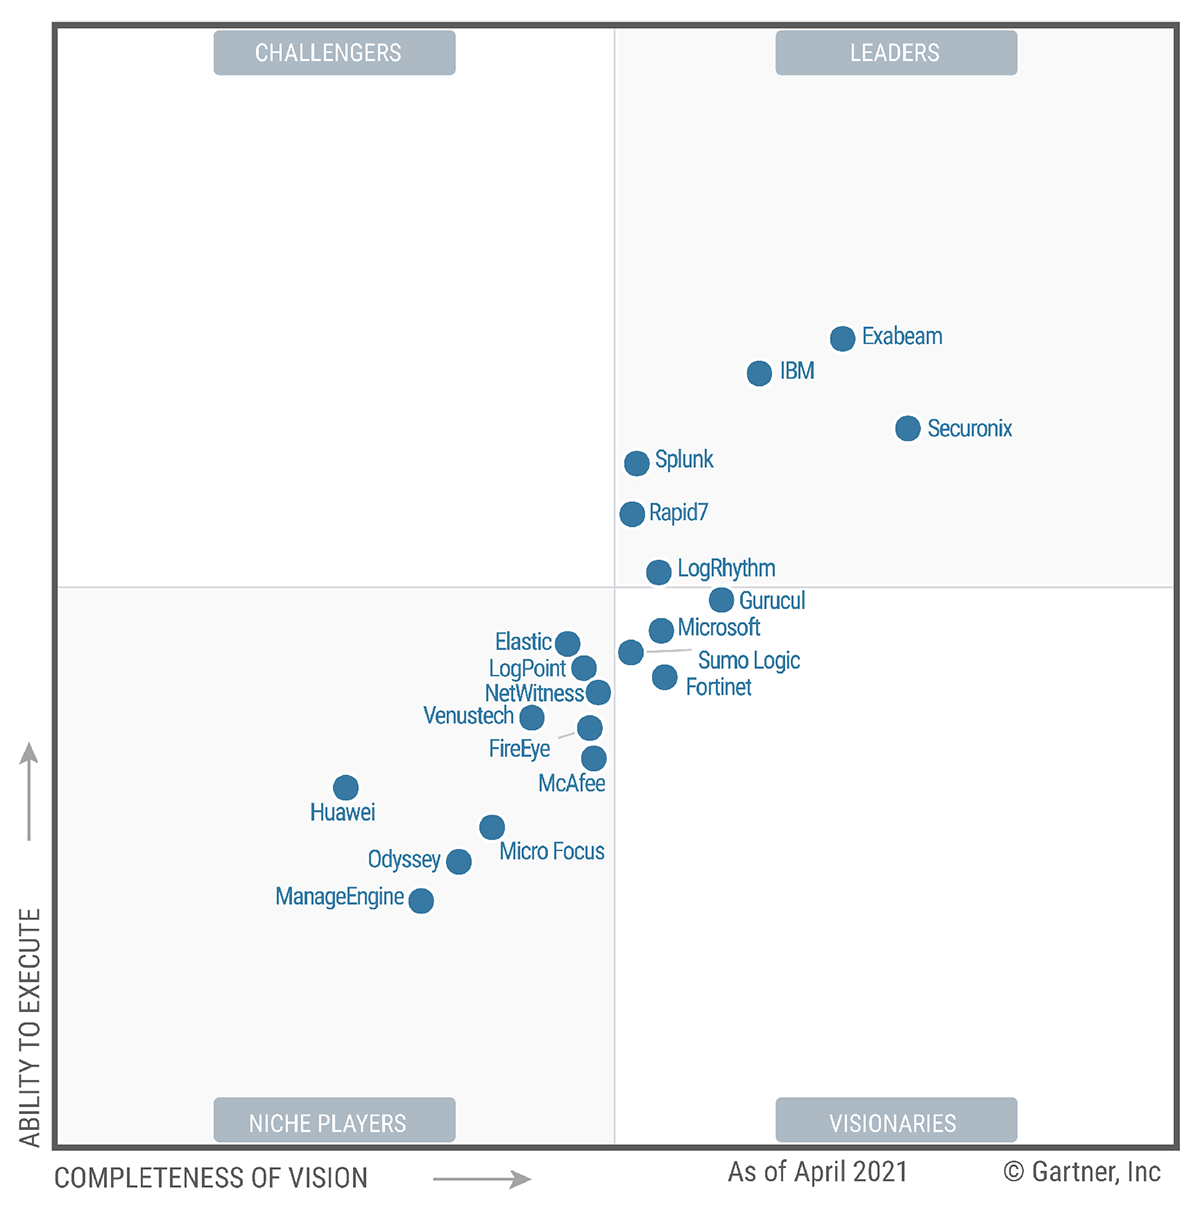 What are Gartner’s Top SIEM Solutions?